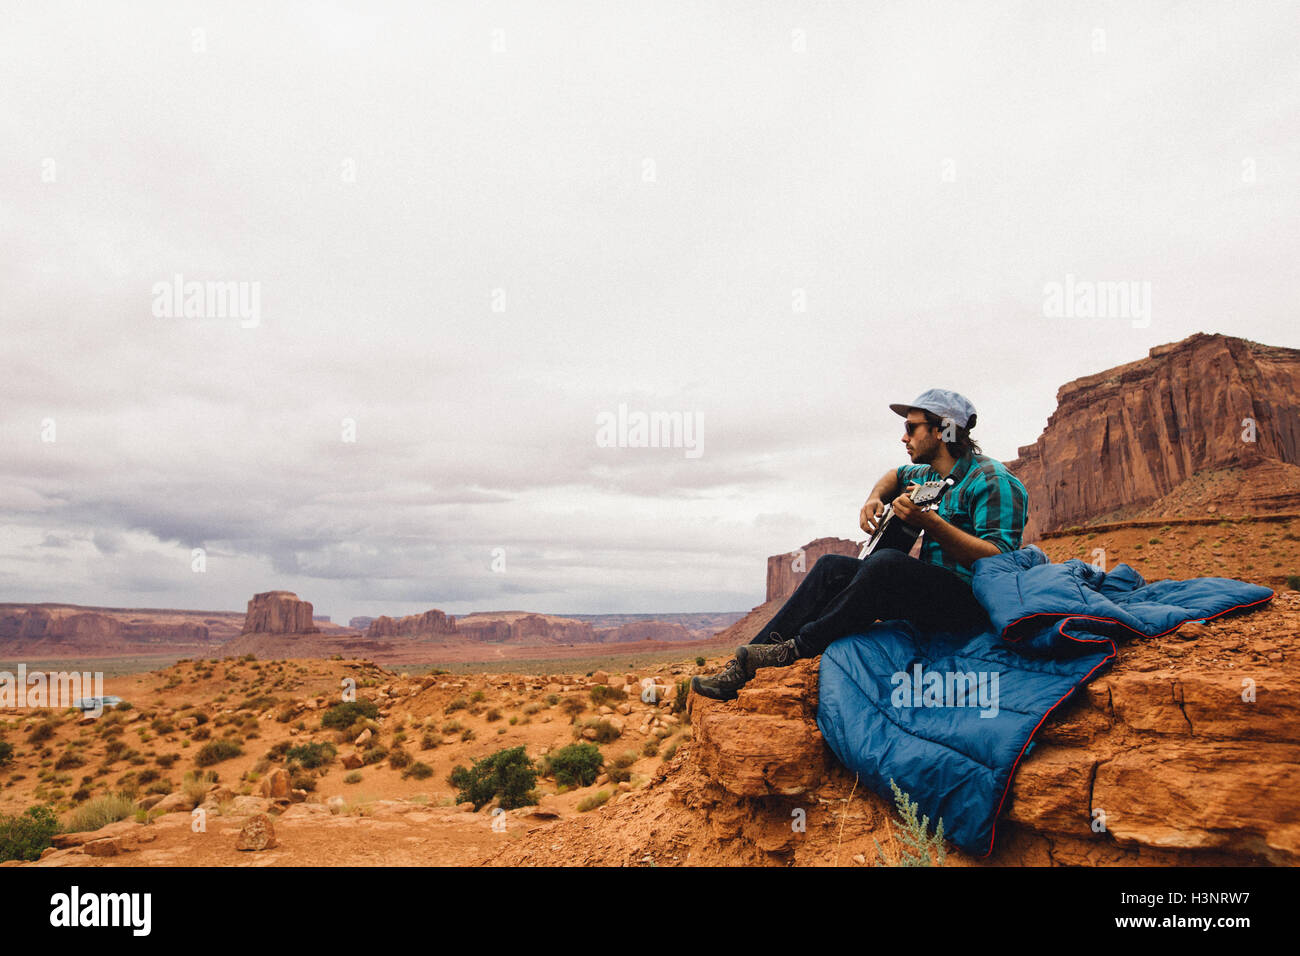 Young man sitting on rock playing acoustic guitar, Monument Valley, Arizona, USA Stock Photo